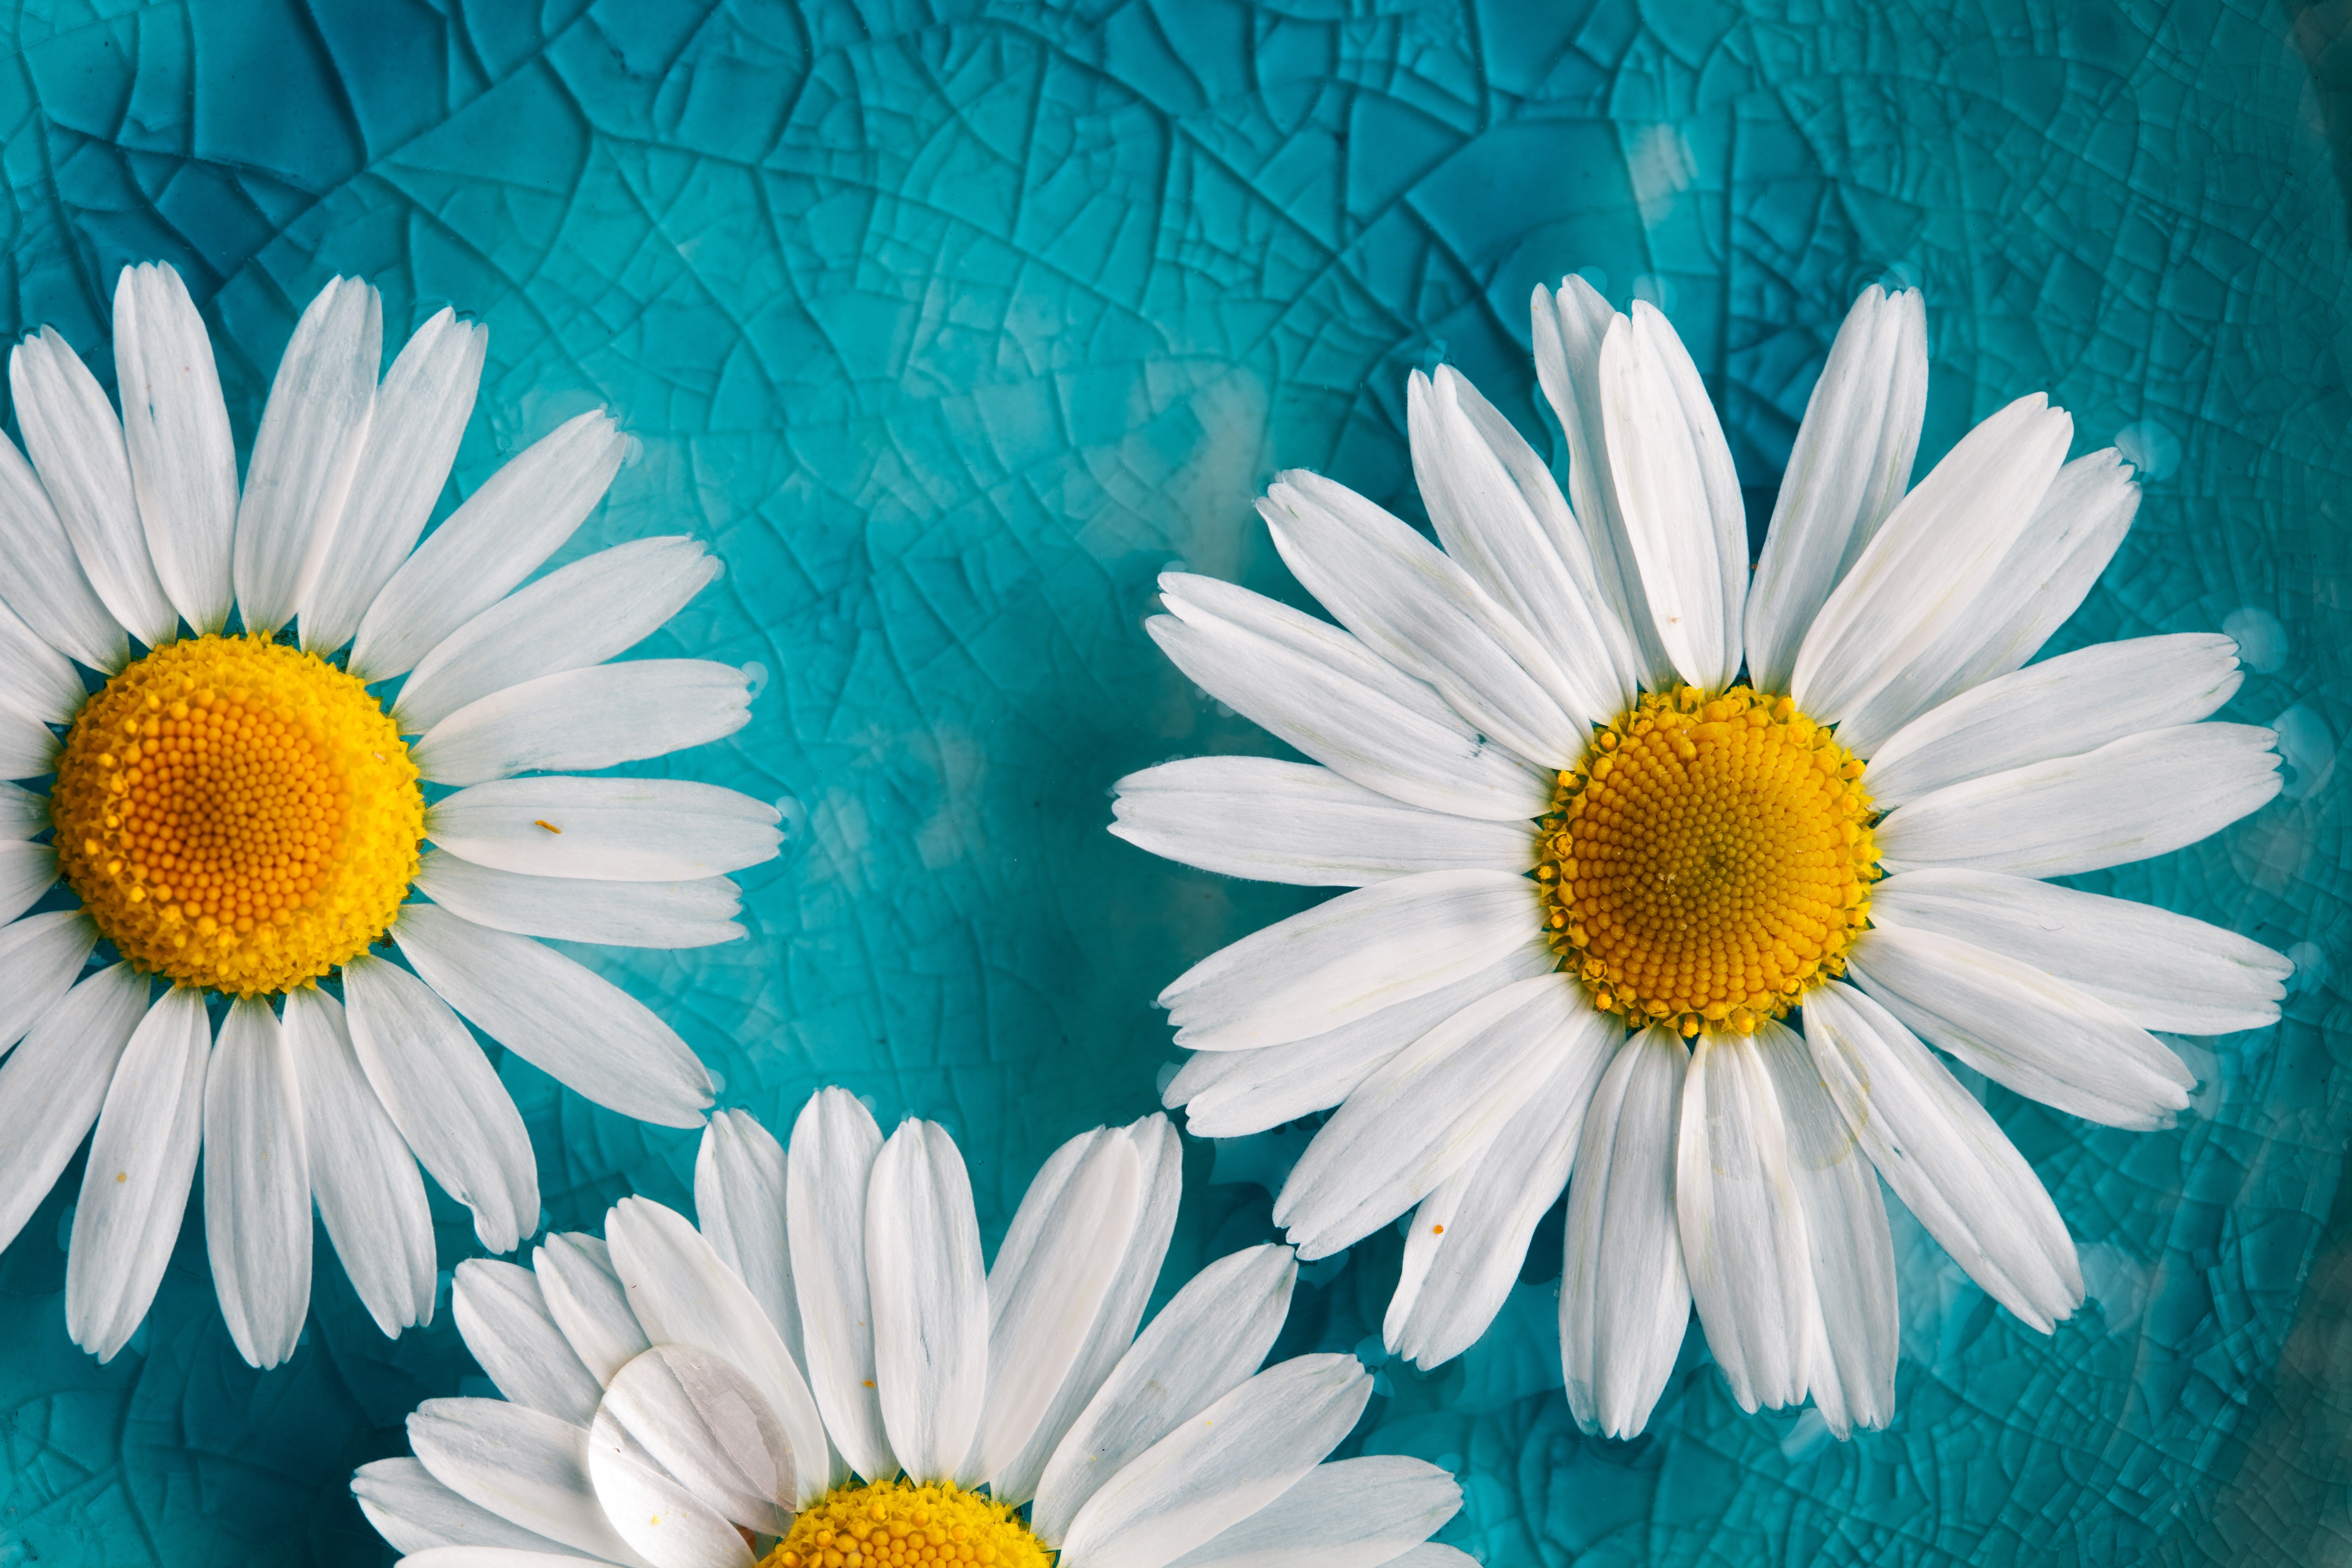 Glass Nature Daisy Artistic Flower Blue White Flower Camomile 7616x5077